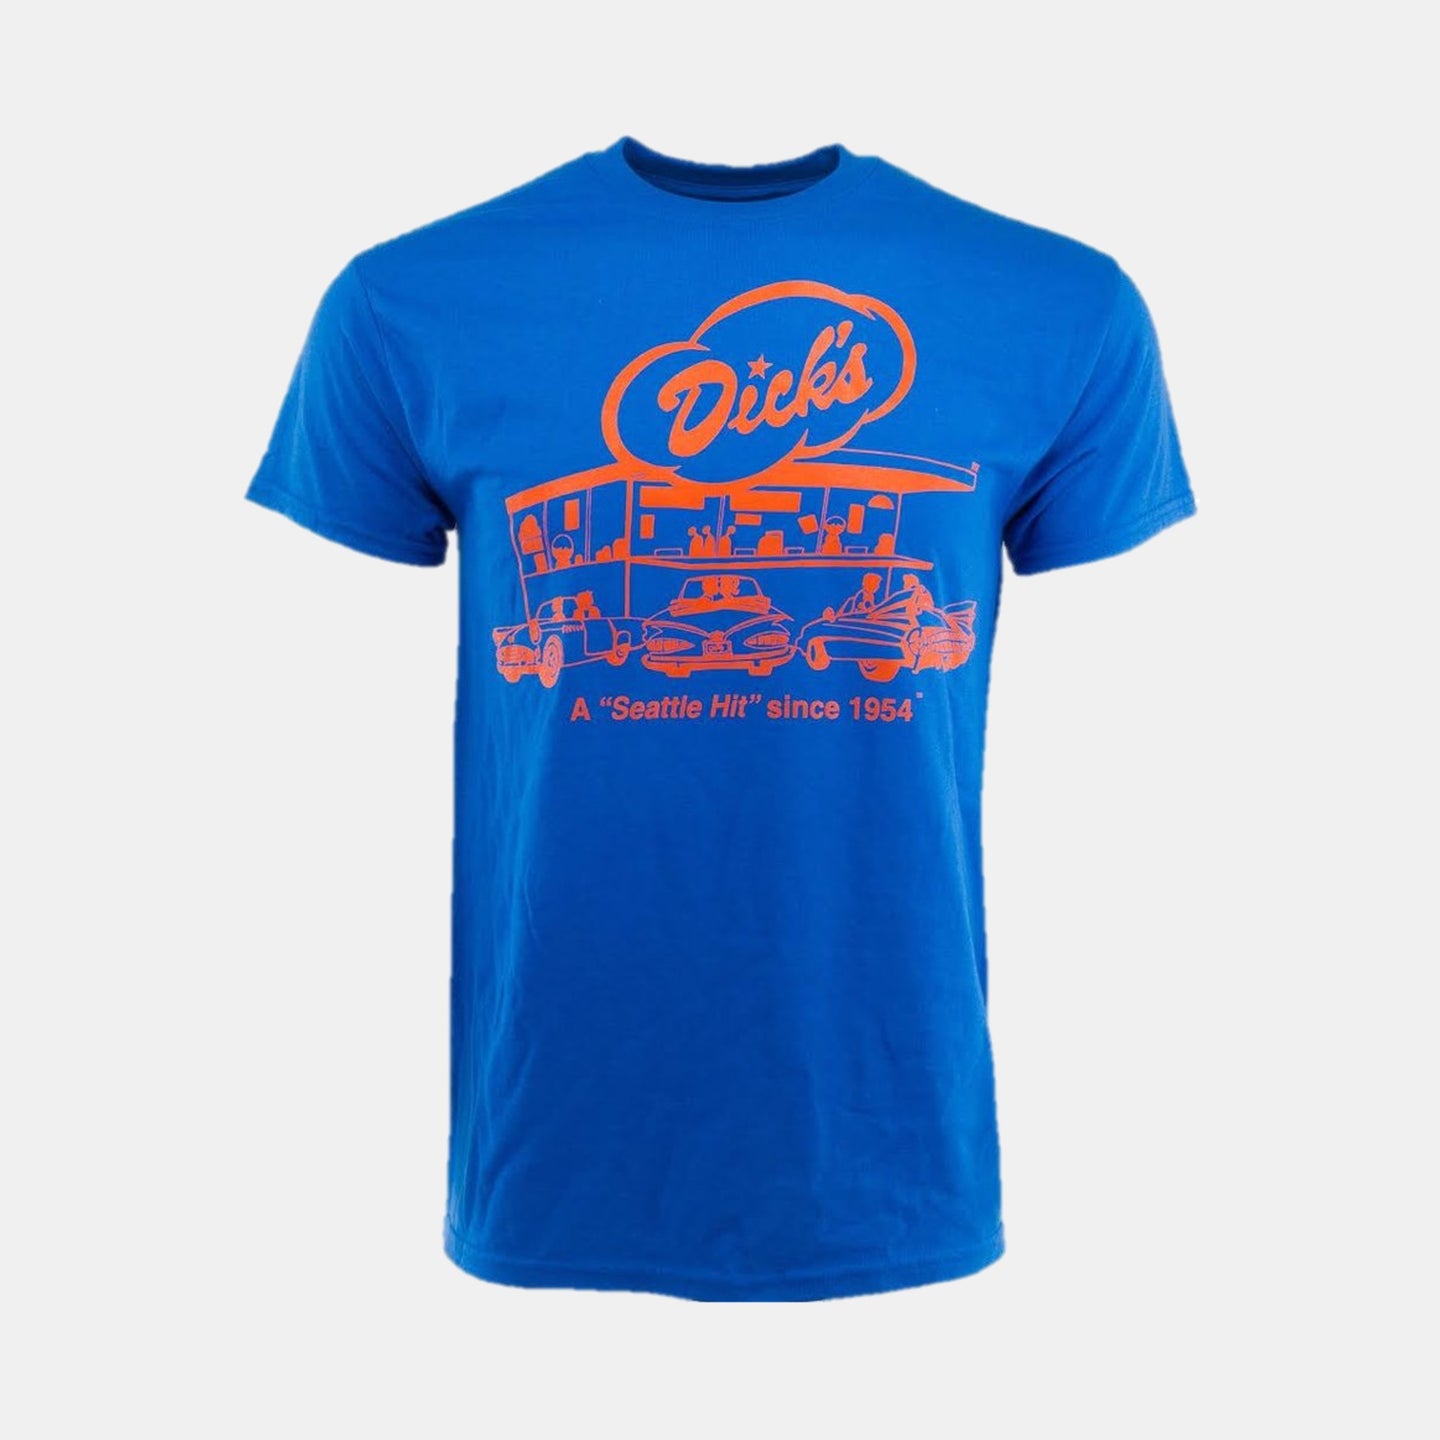 Royal blue t-shirt with orange Dick's Drive-In classic restaurant logo graphic and 